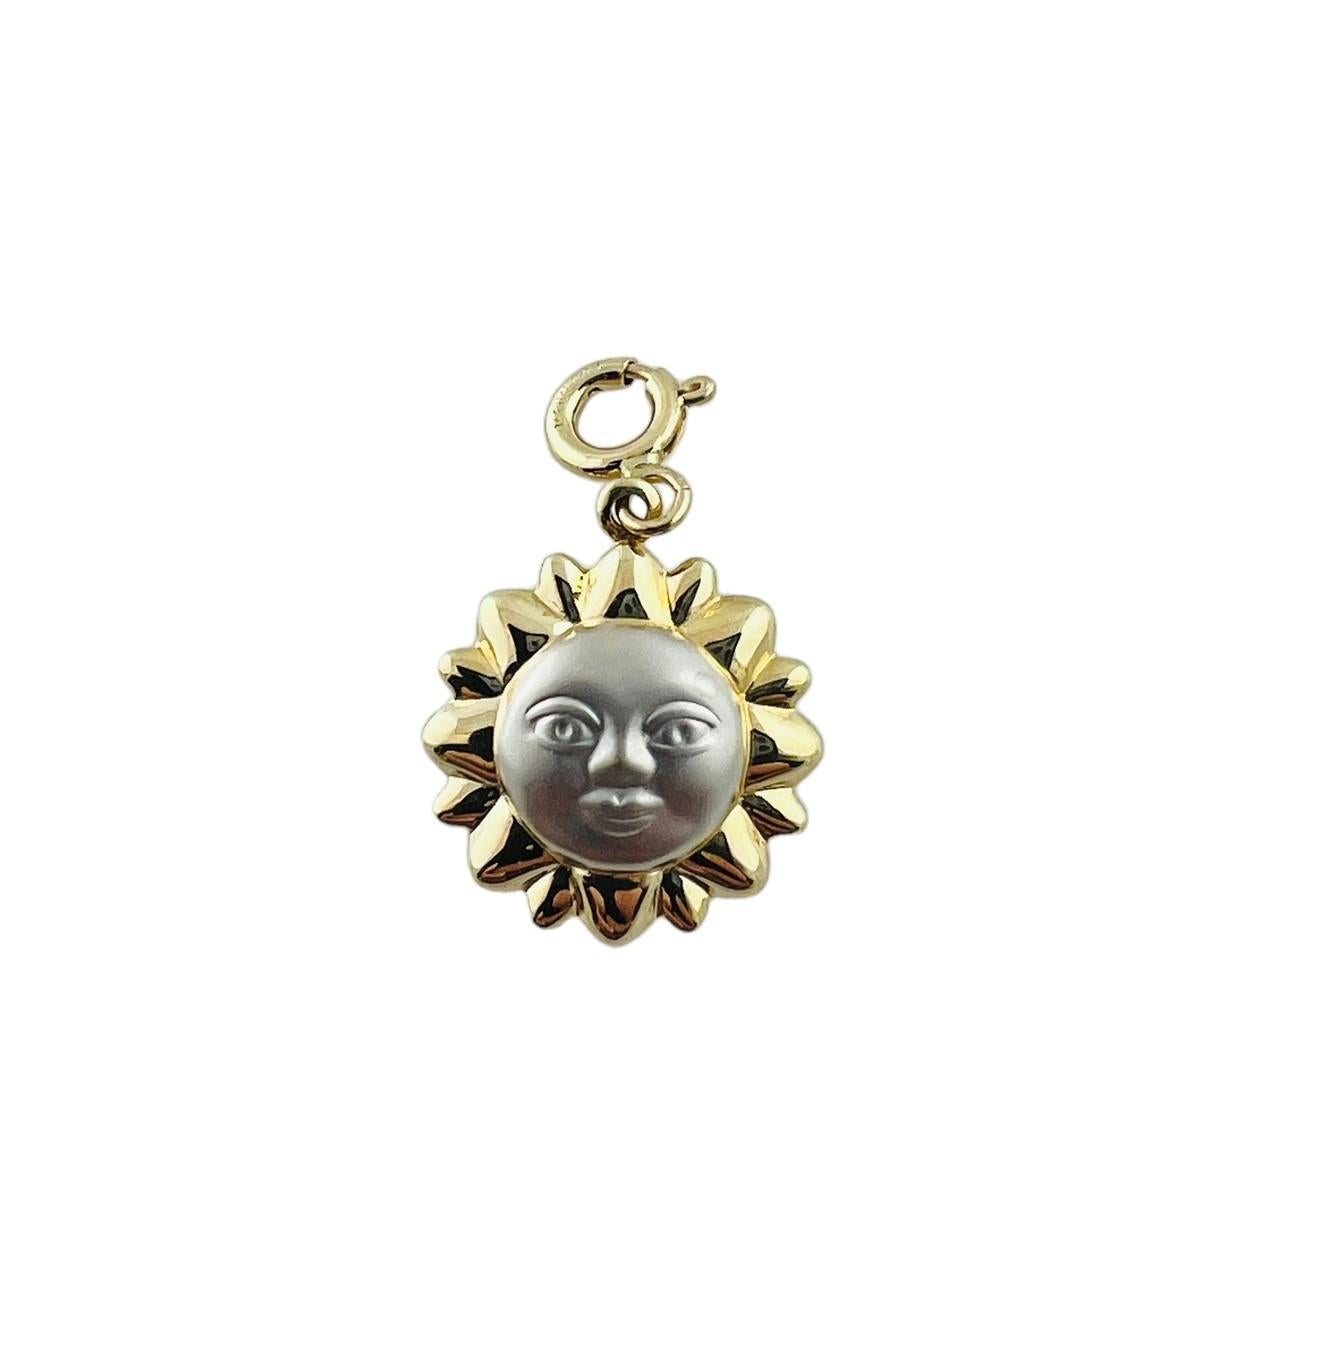 14K Yellow and White Gold Sun Face Charm

This bright charm features a smiling face in white gold on both sides set in yellow gold sun rays.

Charm measures approx. 18.5 mm x 16.3 mm x 5.7 mm and comes on a spring ring

1.1 grams / 0.7 dwt

Stamped